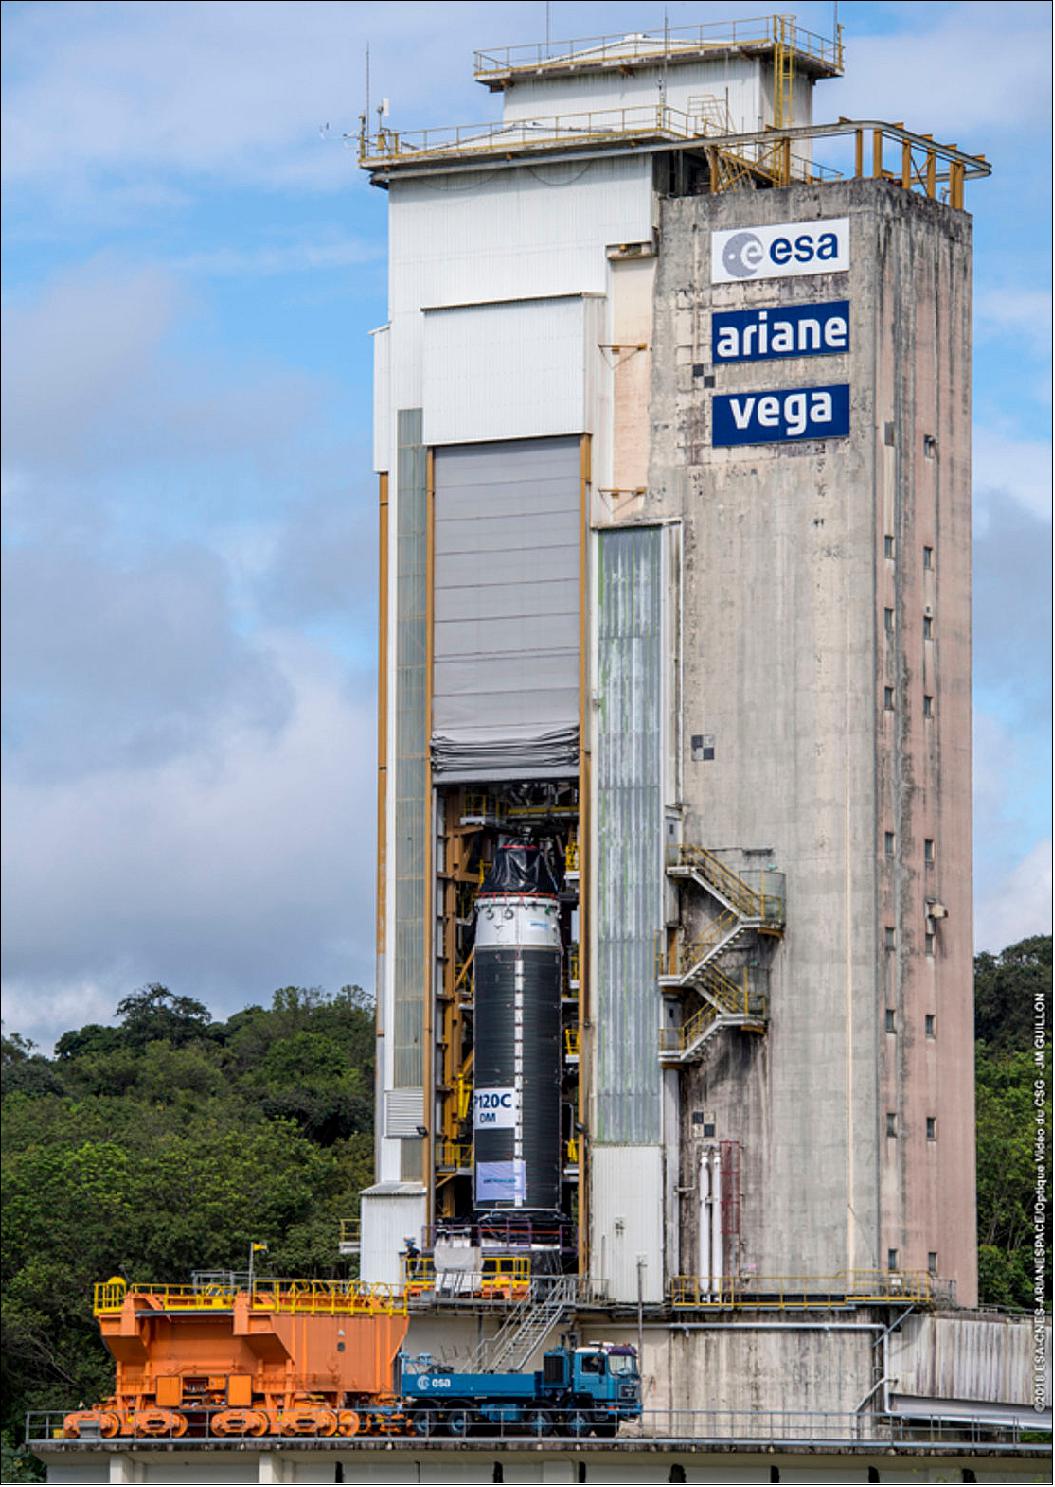 Figure 112: P120C rocket motor transfer to test stand (image credit: ESA/CNES/Arianespace)